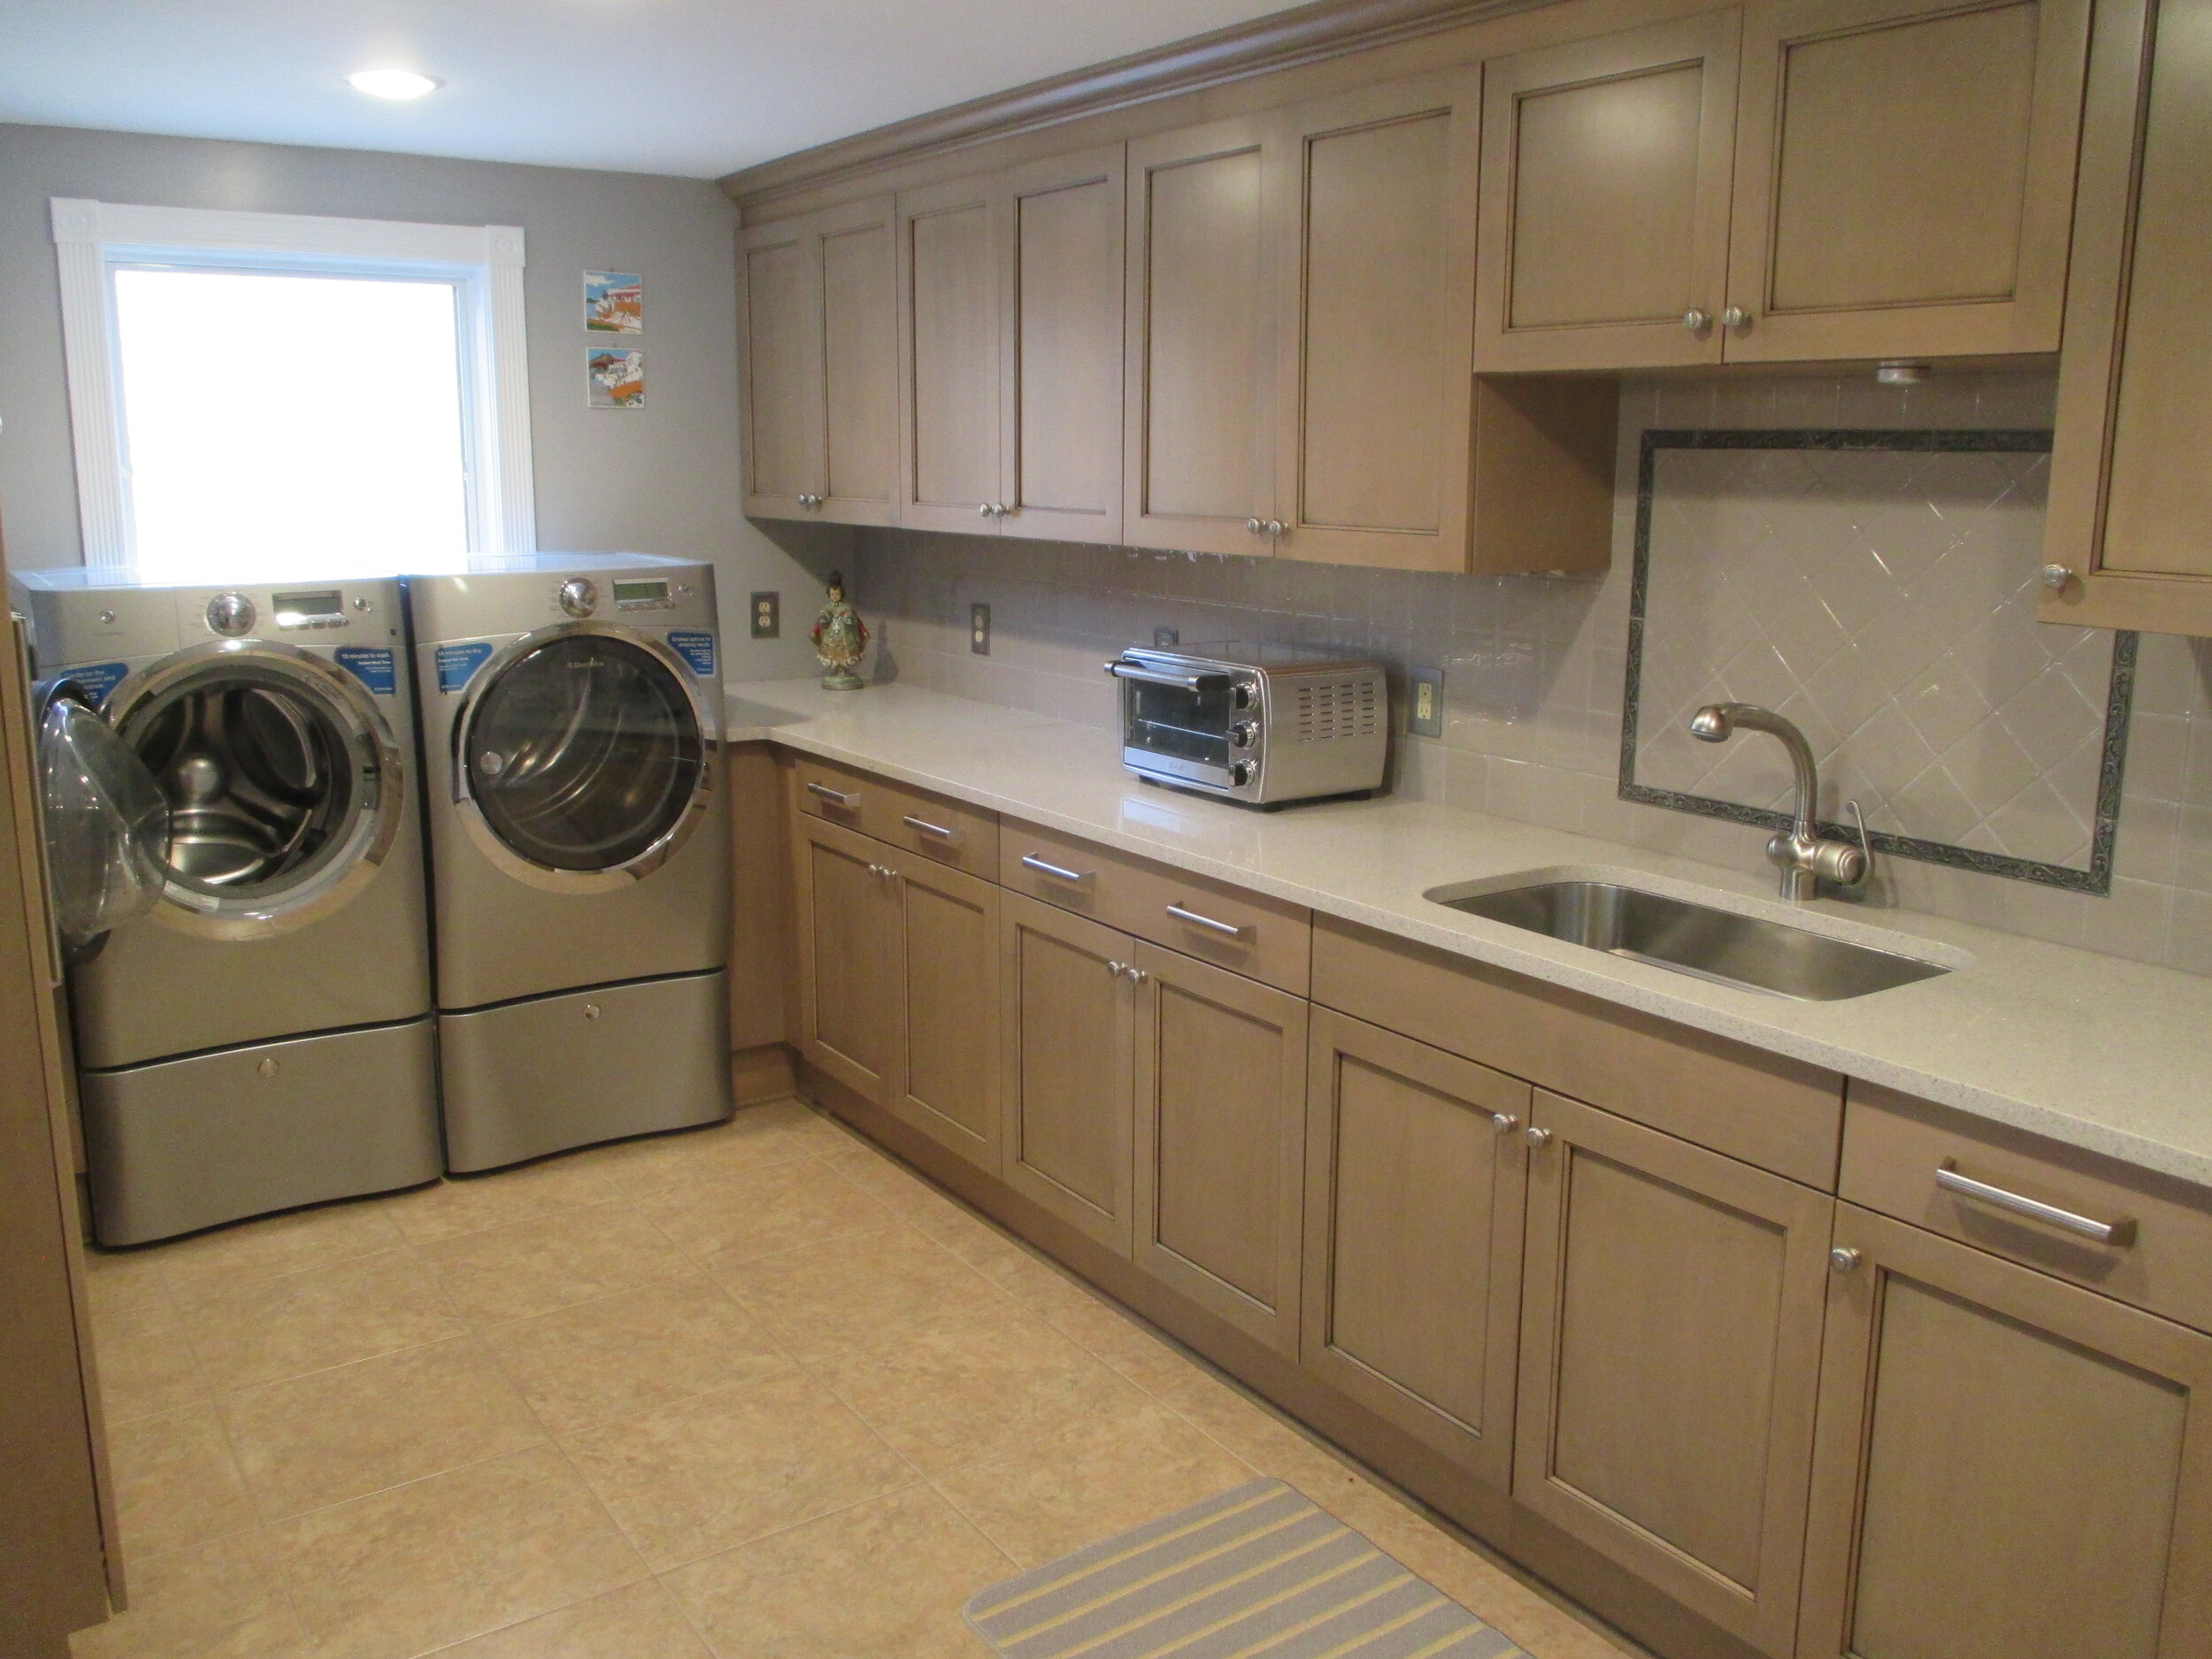 Pantry/Laundry Room